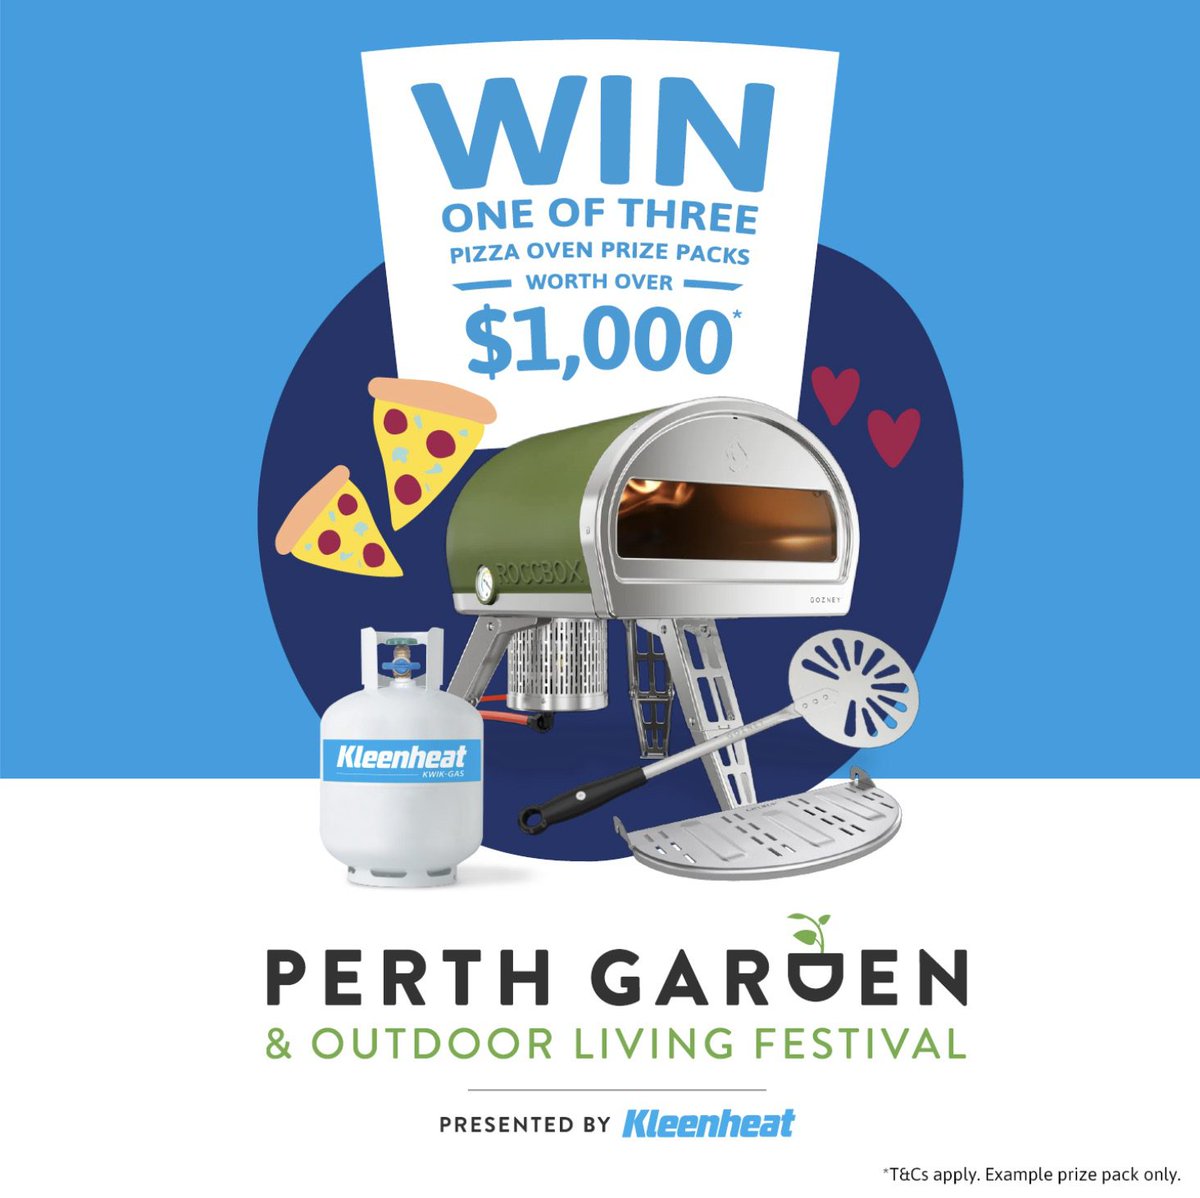 🏆 Kleenheat Competition: Win one of three pizza oven prize packs worth over $1,000 each
👉 competitionsinaustralia.com/kleenheat-comp…

#aus🇦🇺 #competition #comp #comps #australia #competitions #competitionaustralia #competitiontime